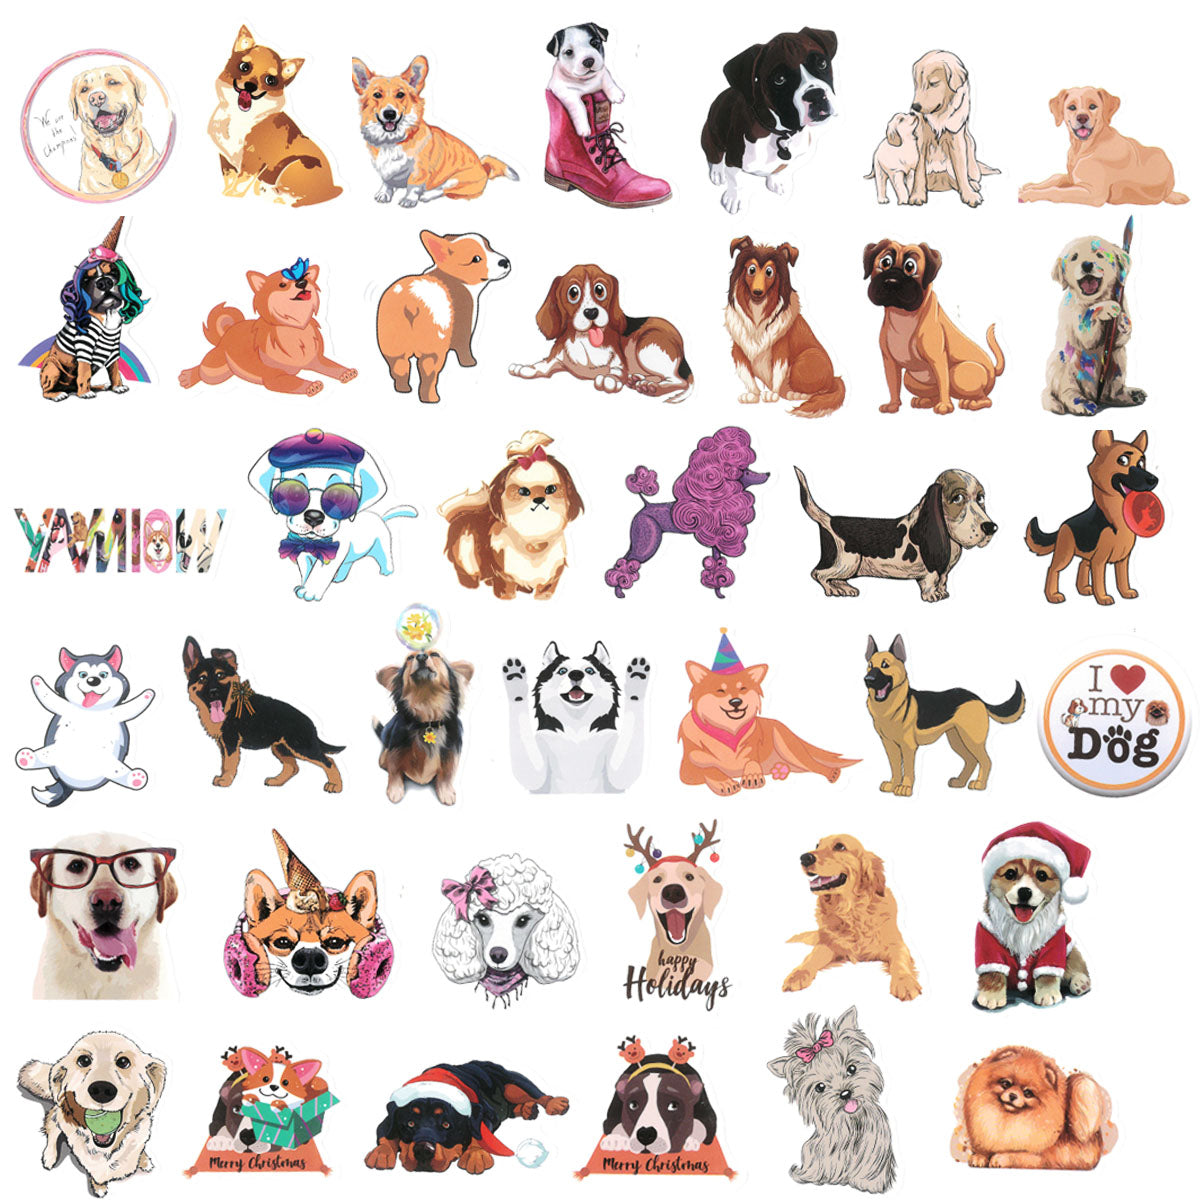 Wrapables Waterproof Vinyl Stickers for Water Bottles, Laptop, Phones, Skateboards, Decals for Teens 100pcs, Funny Felines